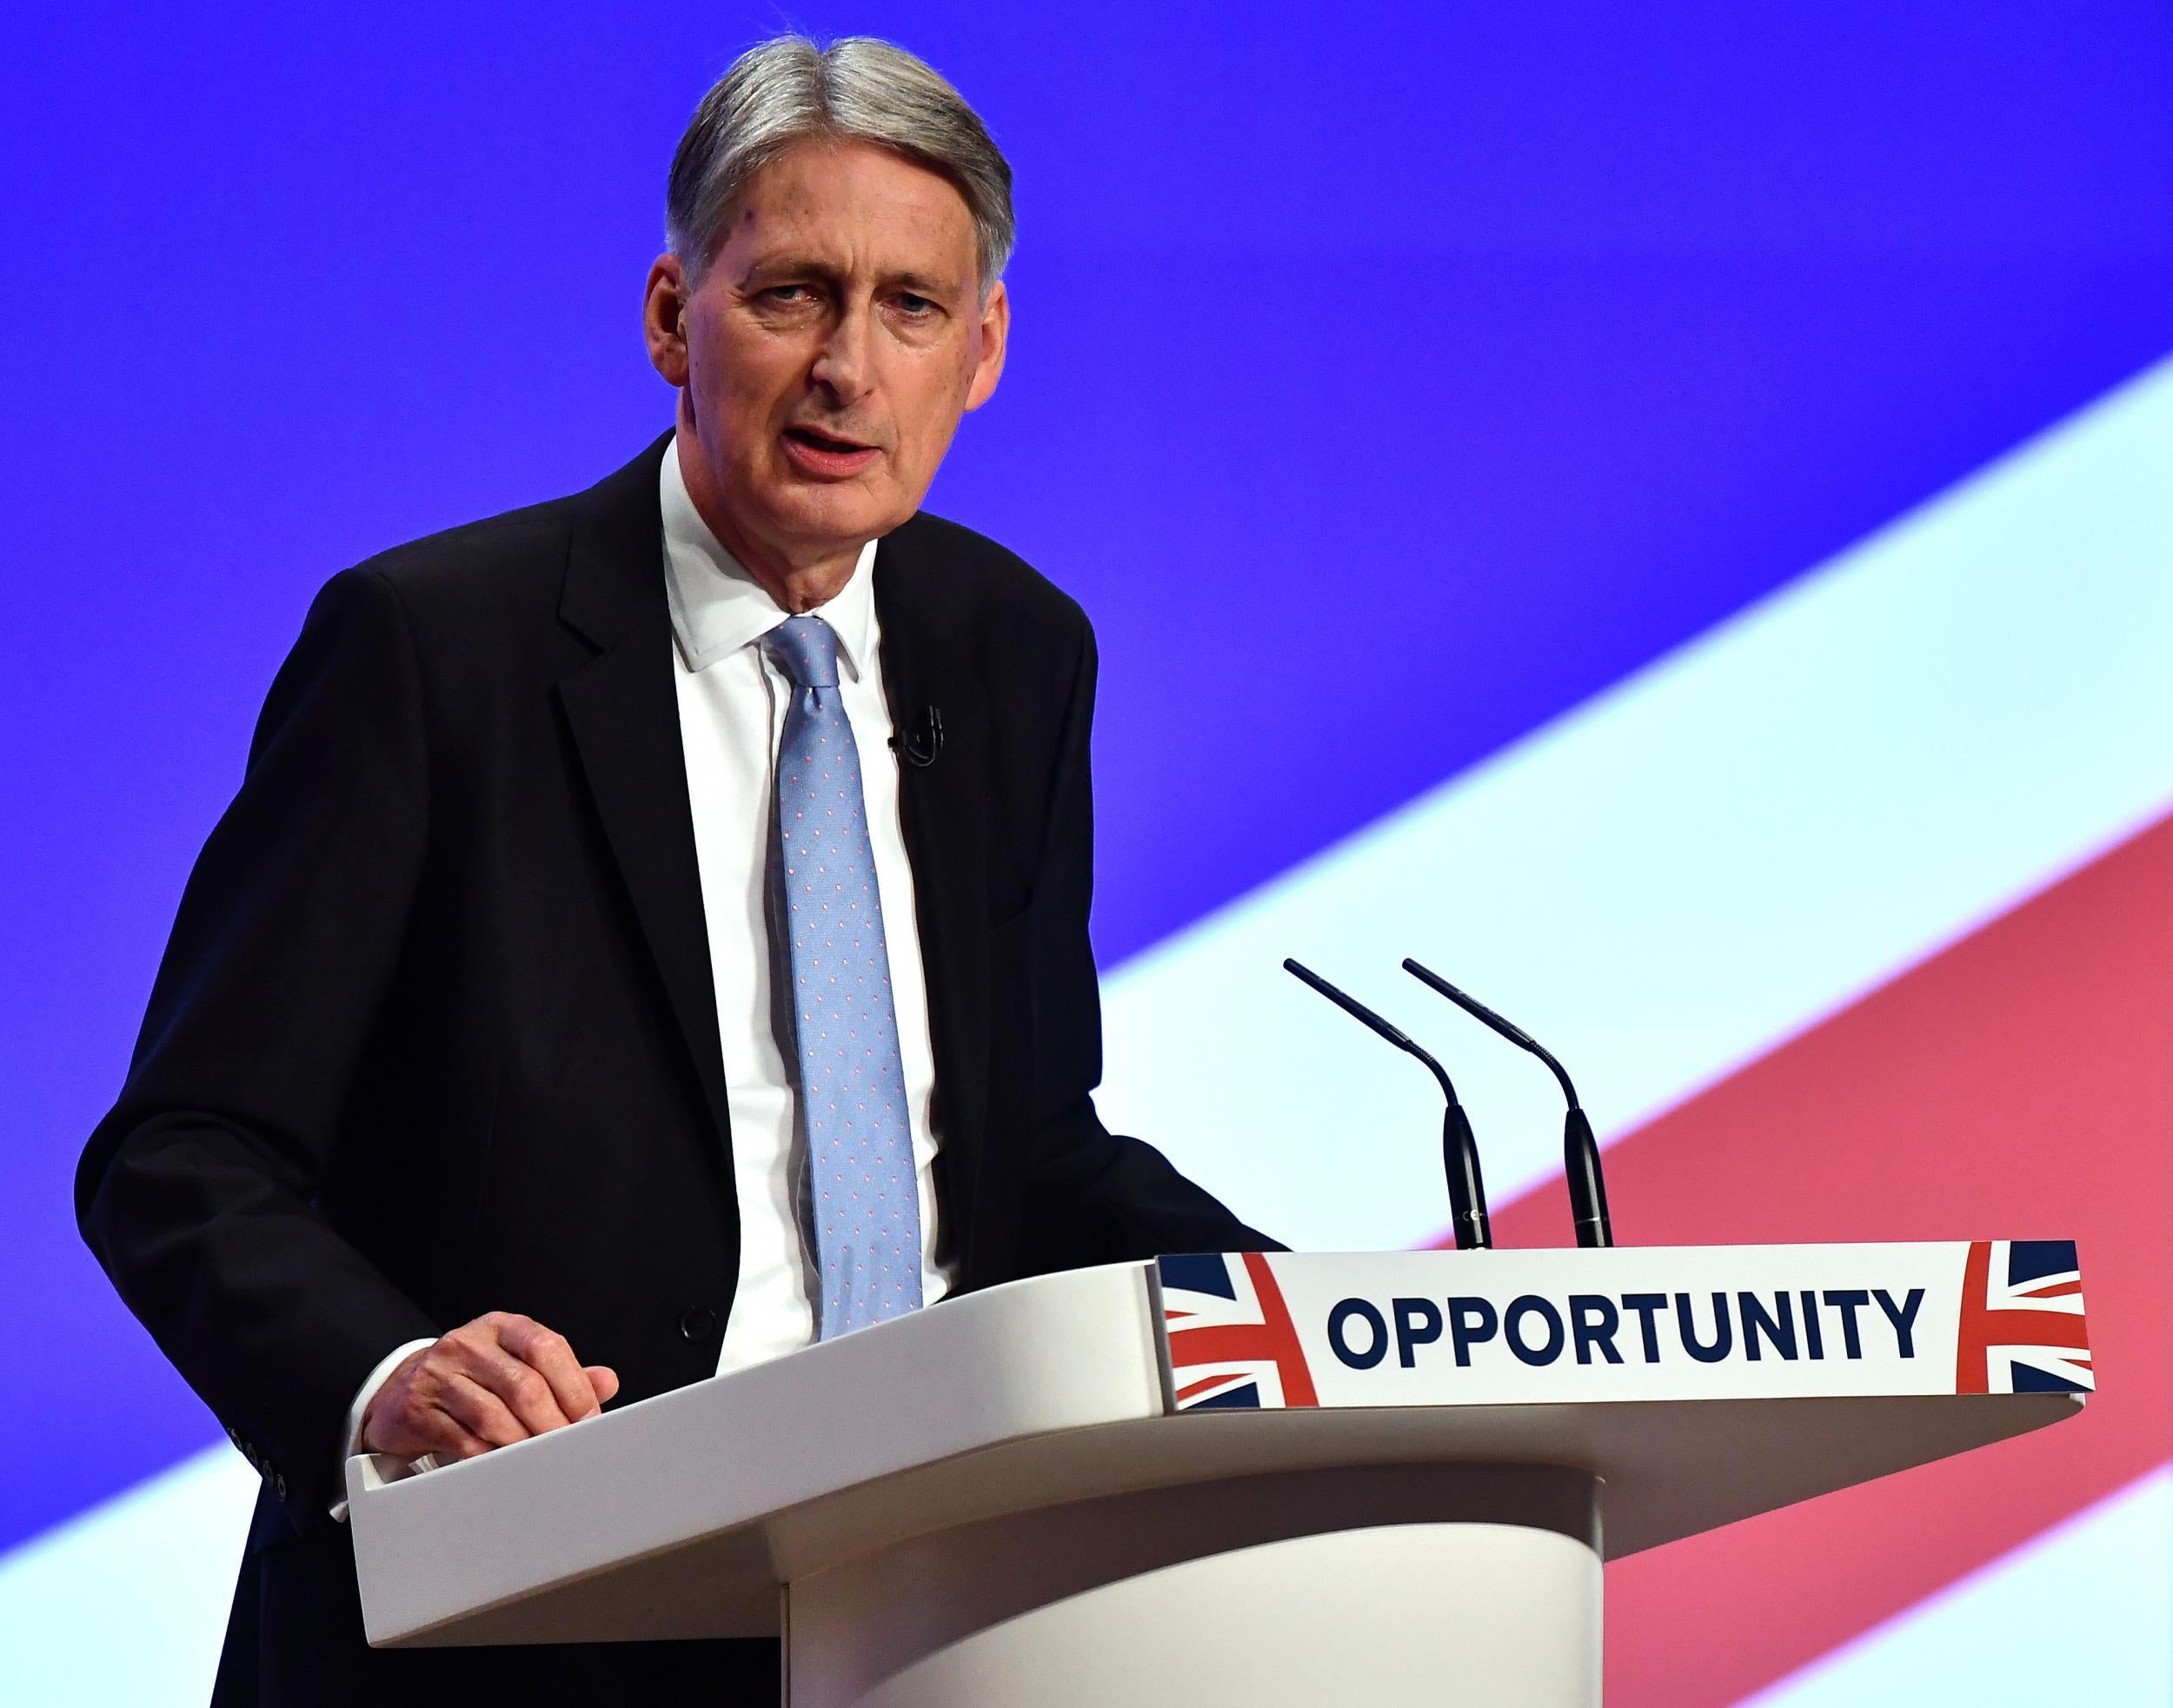 During his speech, Mr Hammond dreamed, almost like John Lennon, about the brighter, sunnier future